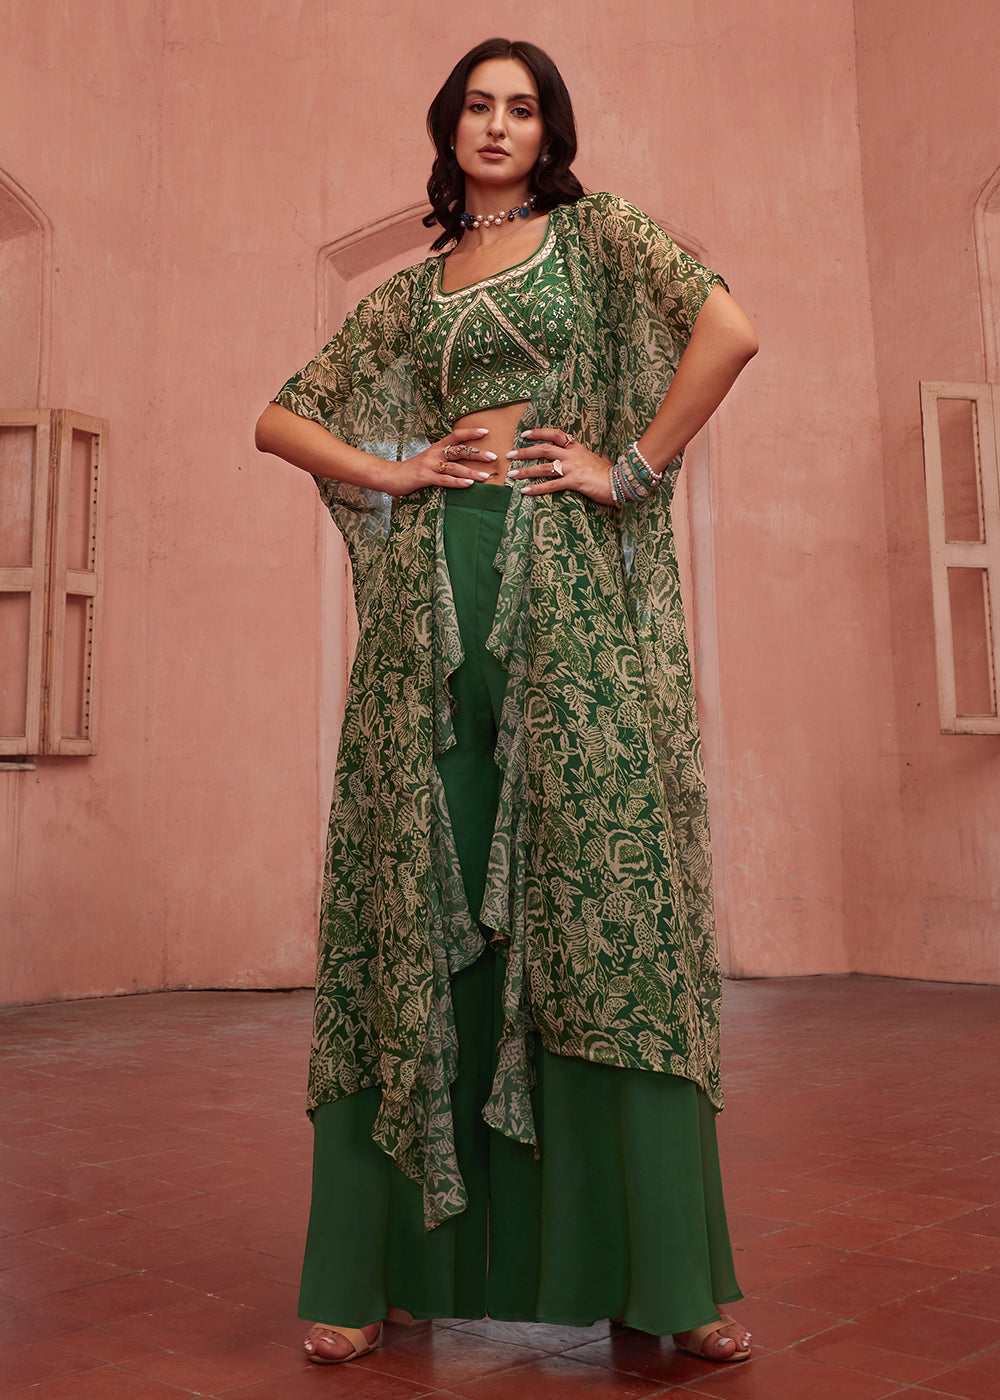 Shop Now Stunning Green Designer Crop Top Style Sharara Suit Online at Empress Clothing in USA, UK, Canada, Italy & Worldwide.